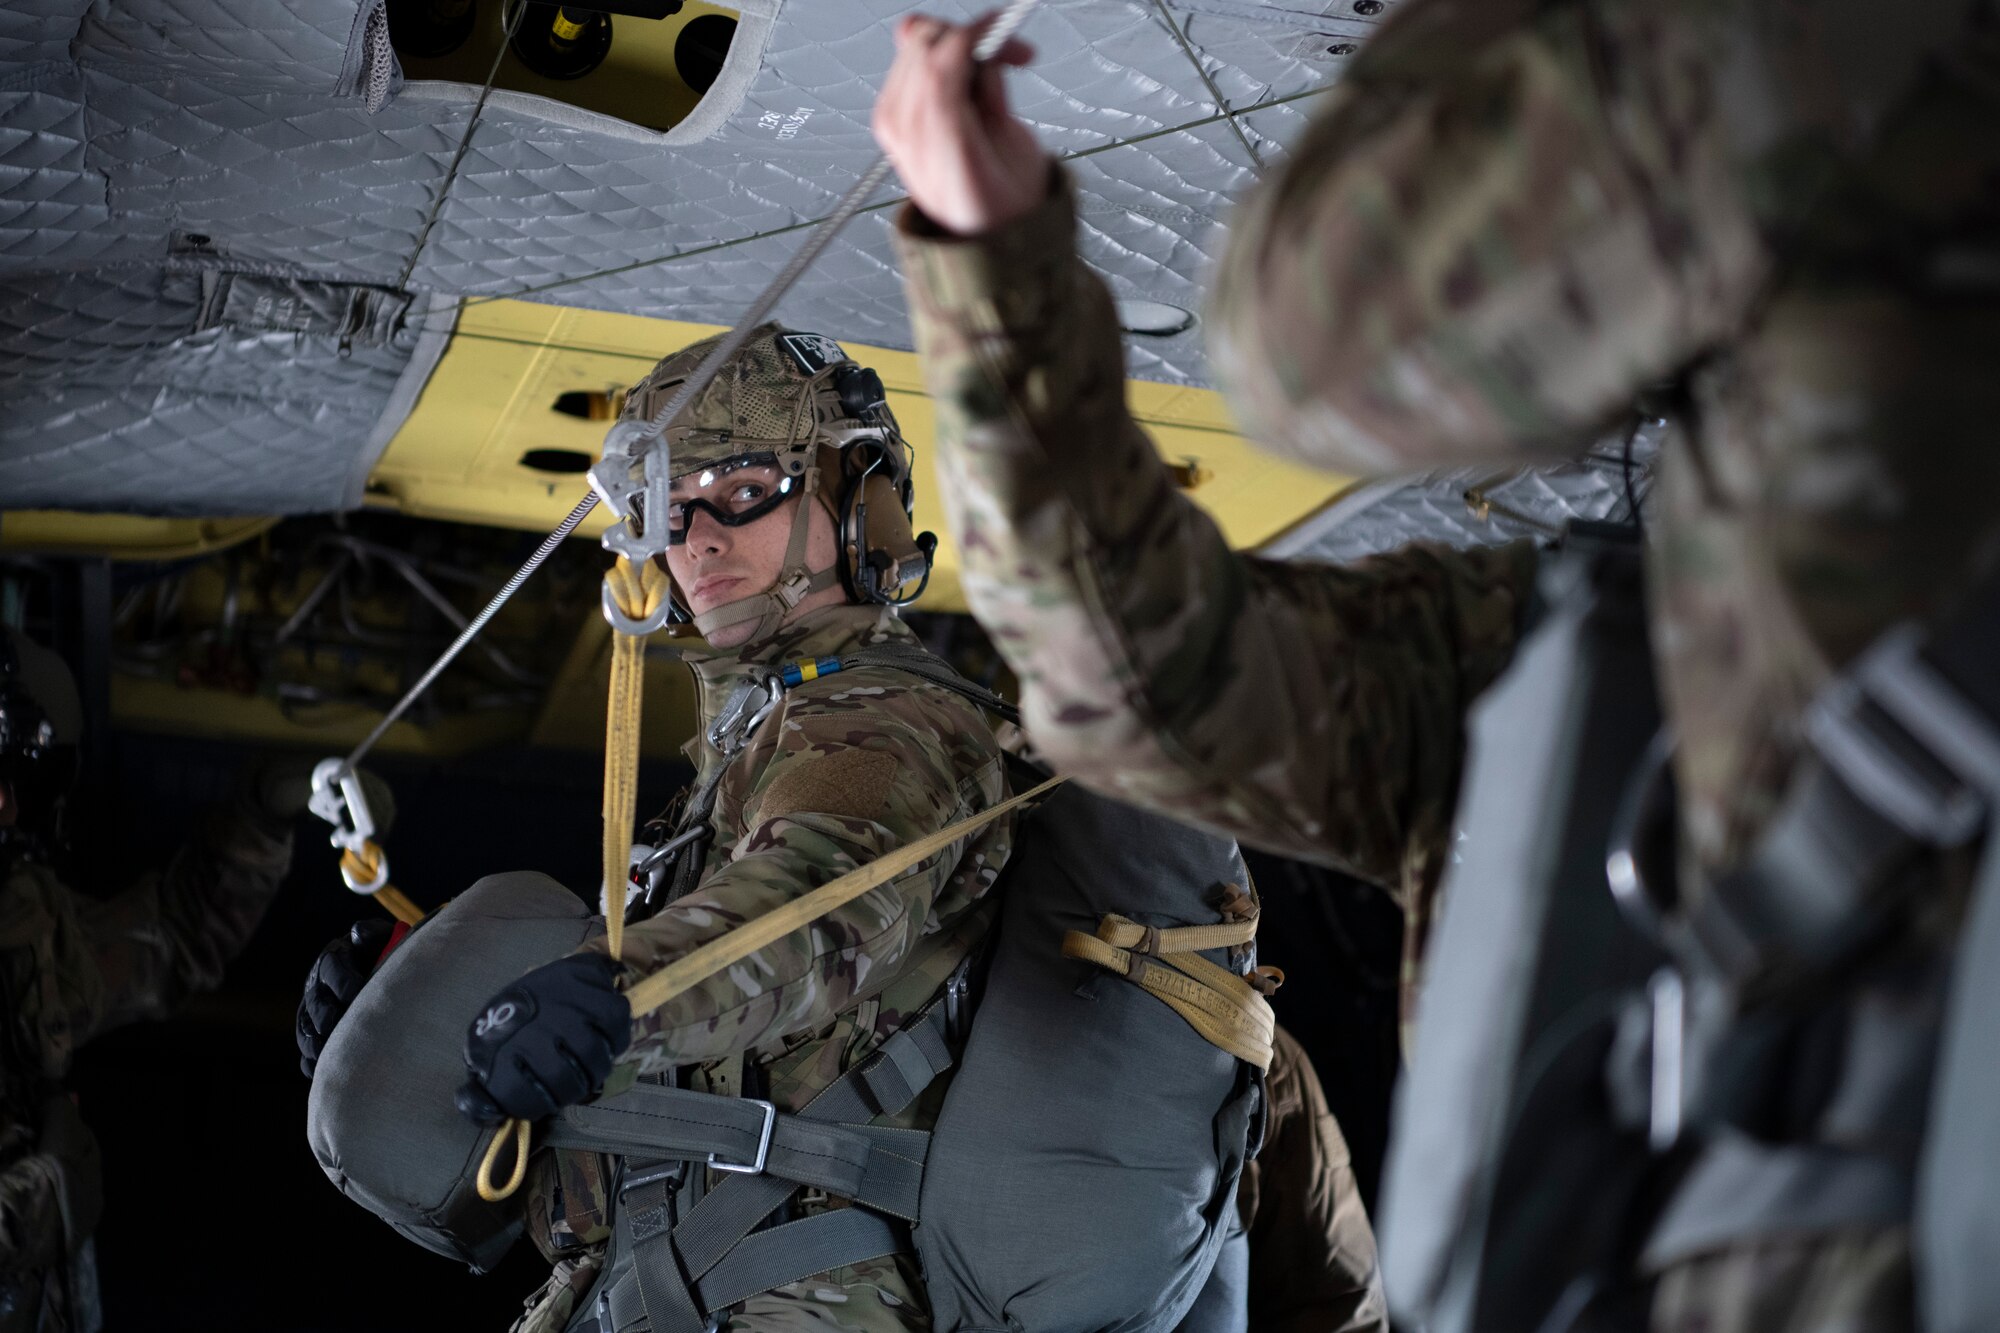 A photo of a man standing to prepare to jump out of a helicopter